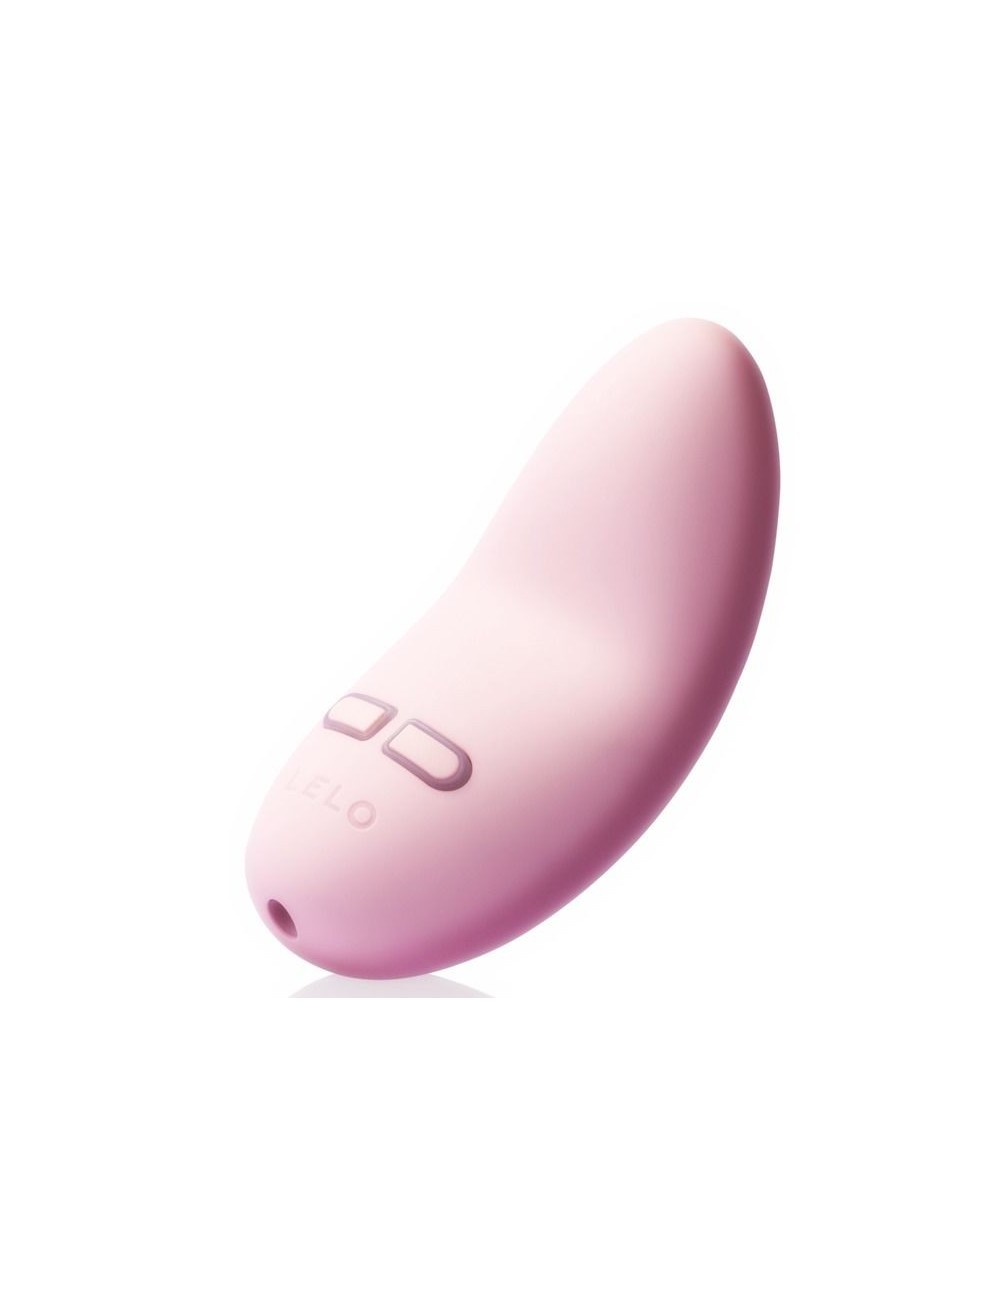 Sextoys - Jeux coquins - LELO LILY 2 PINK PERSONAL MASSAGER - Lelo